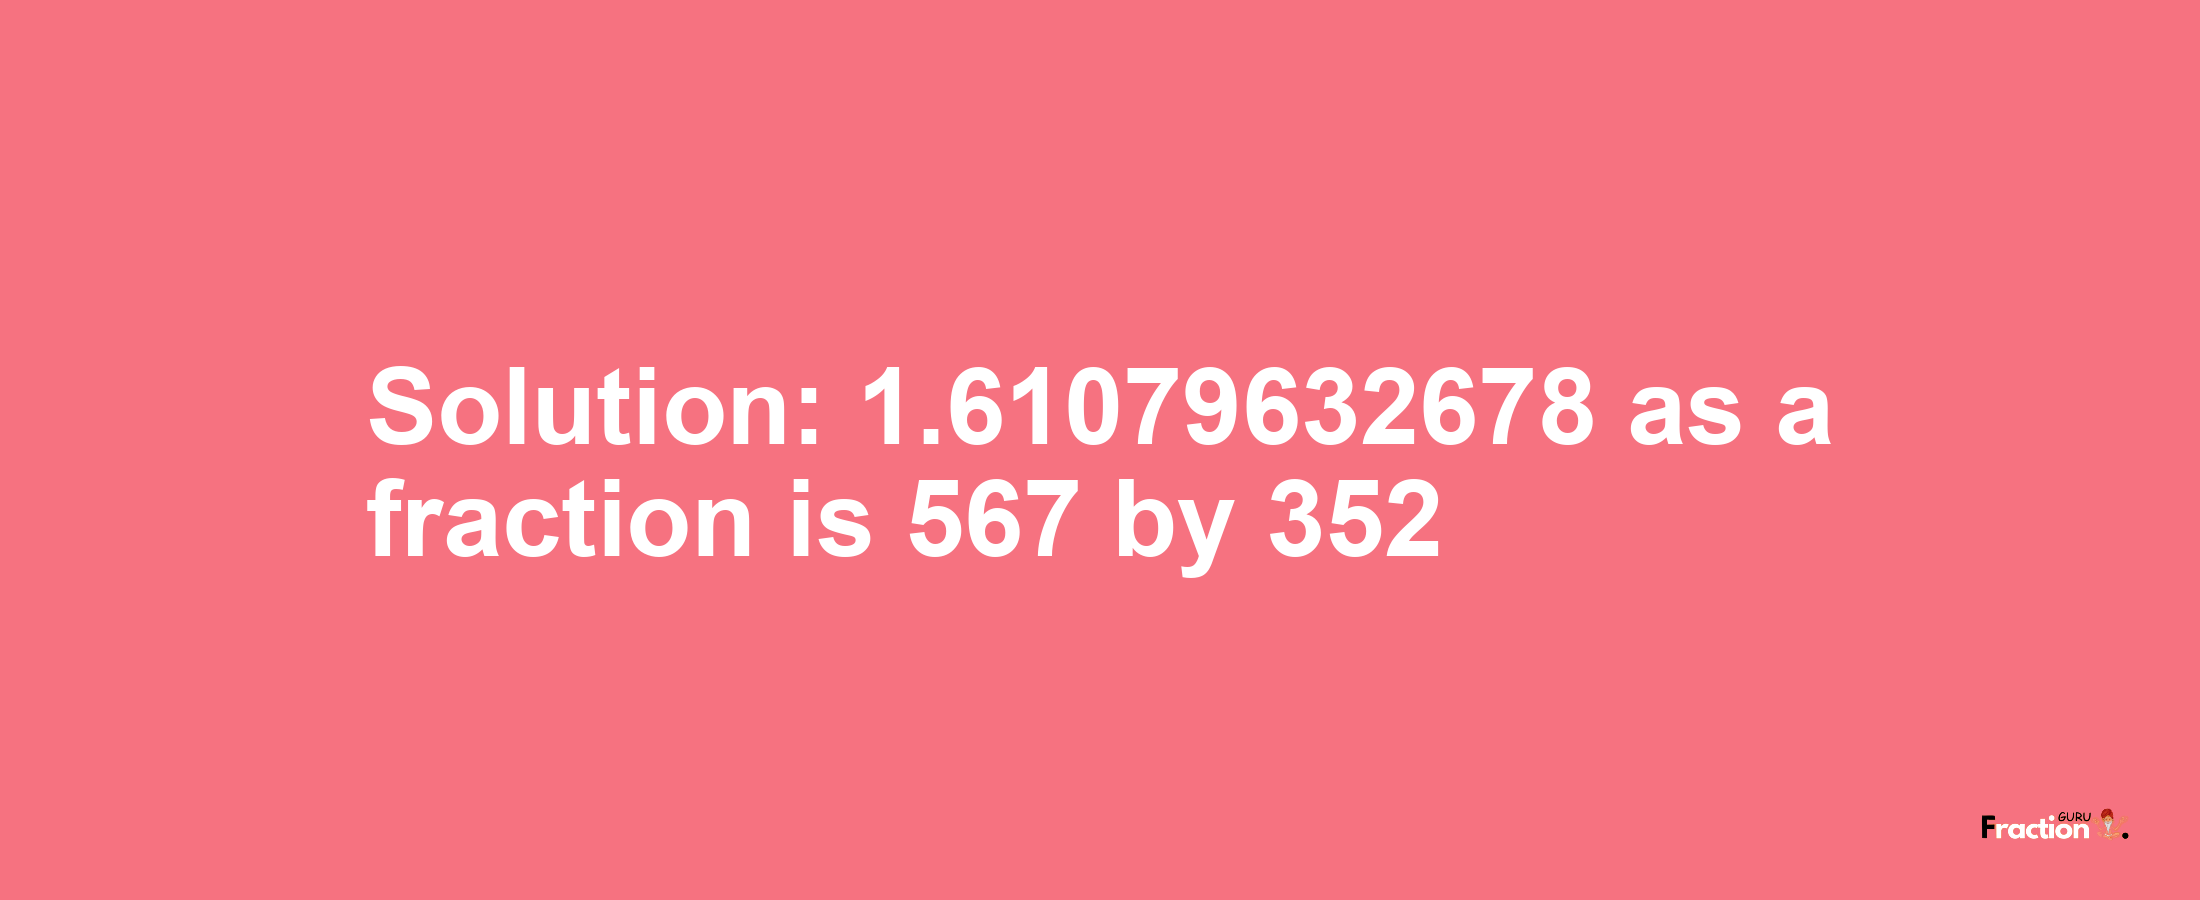 Solution:1.61079632678 as a fraction is 567/352